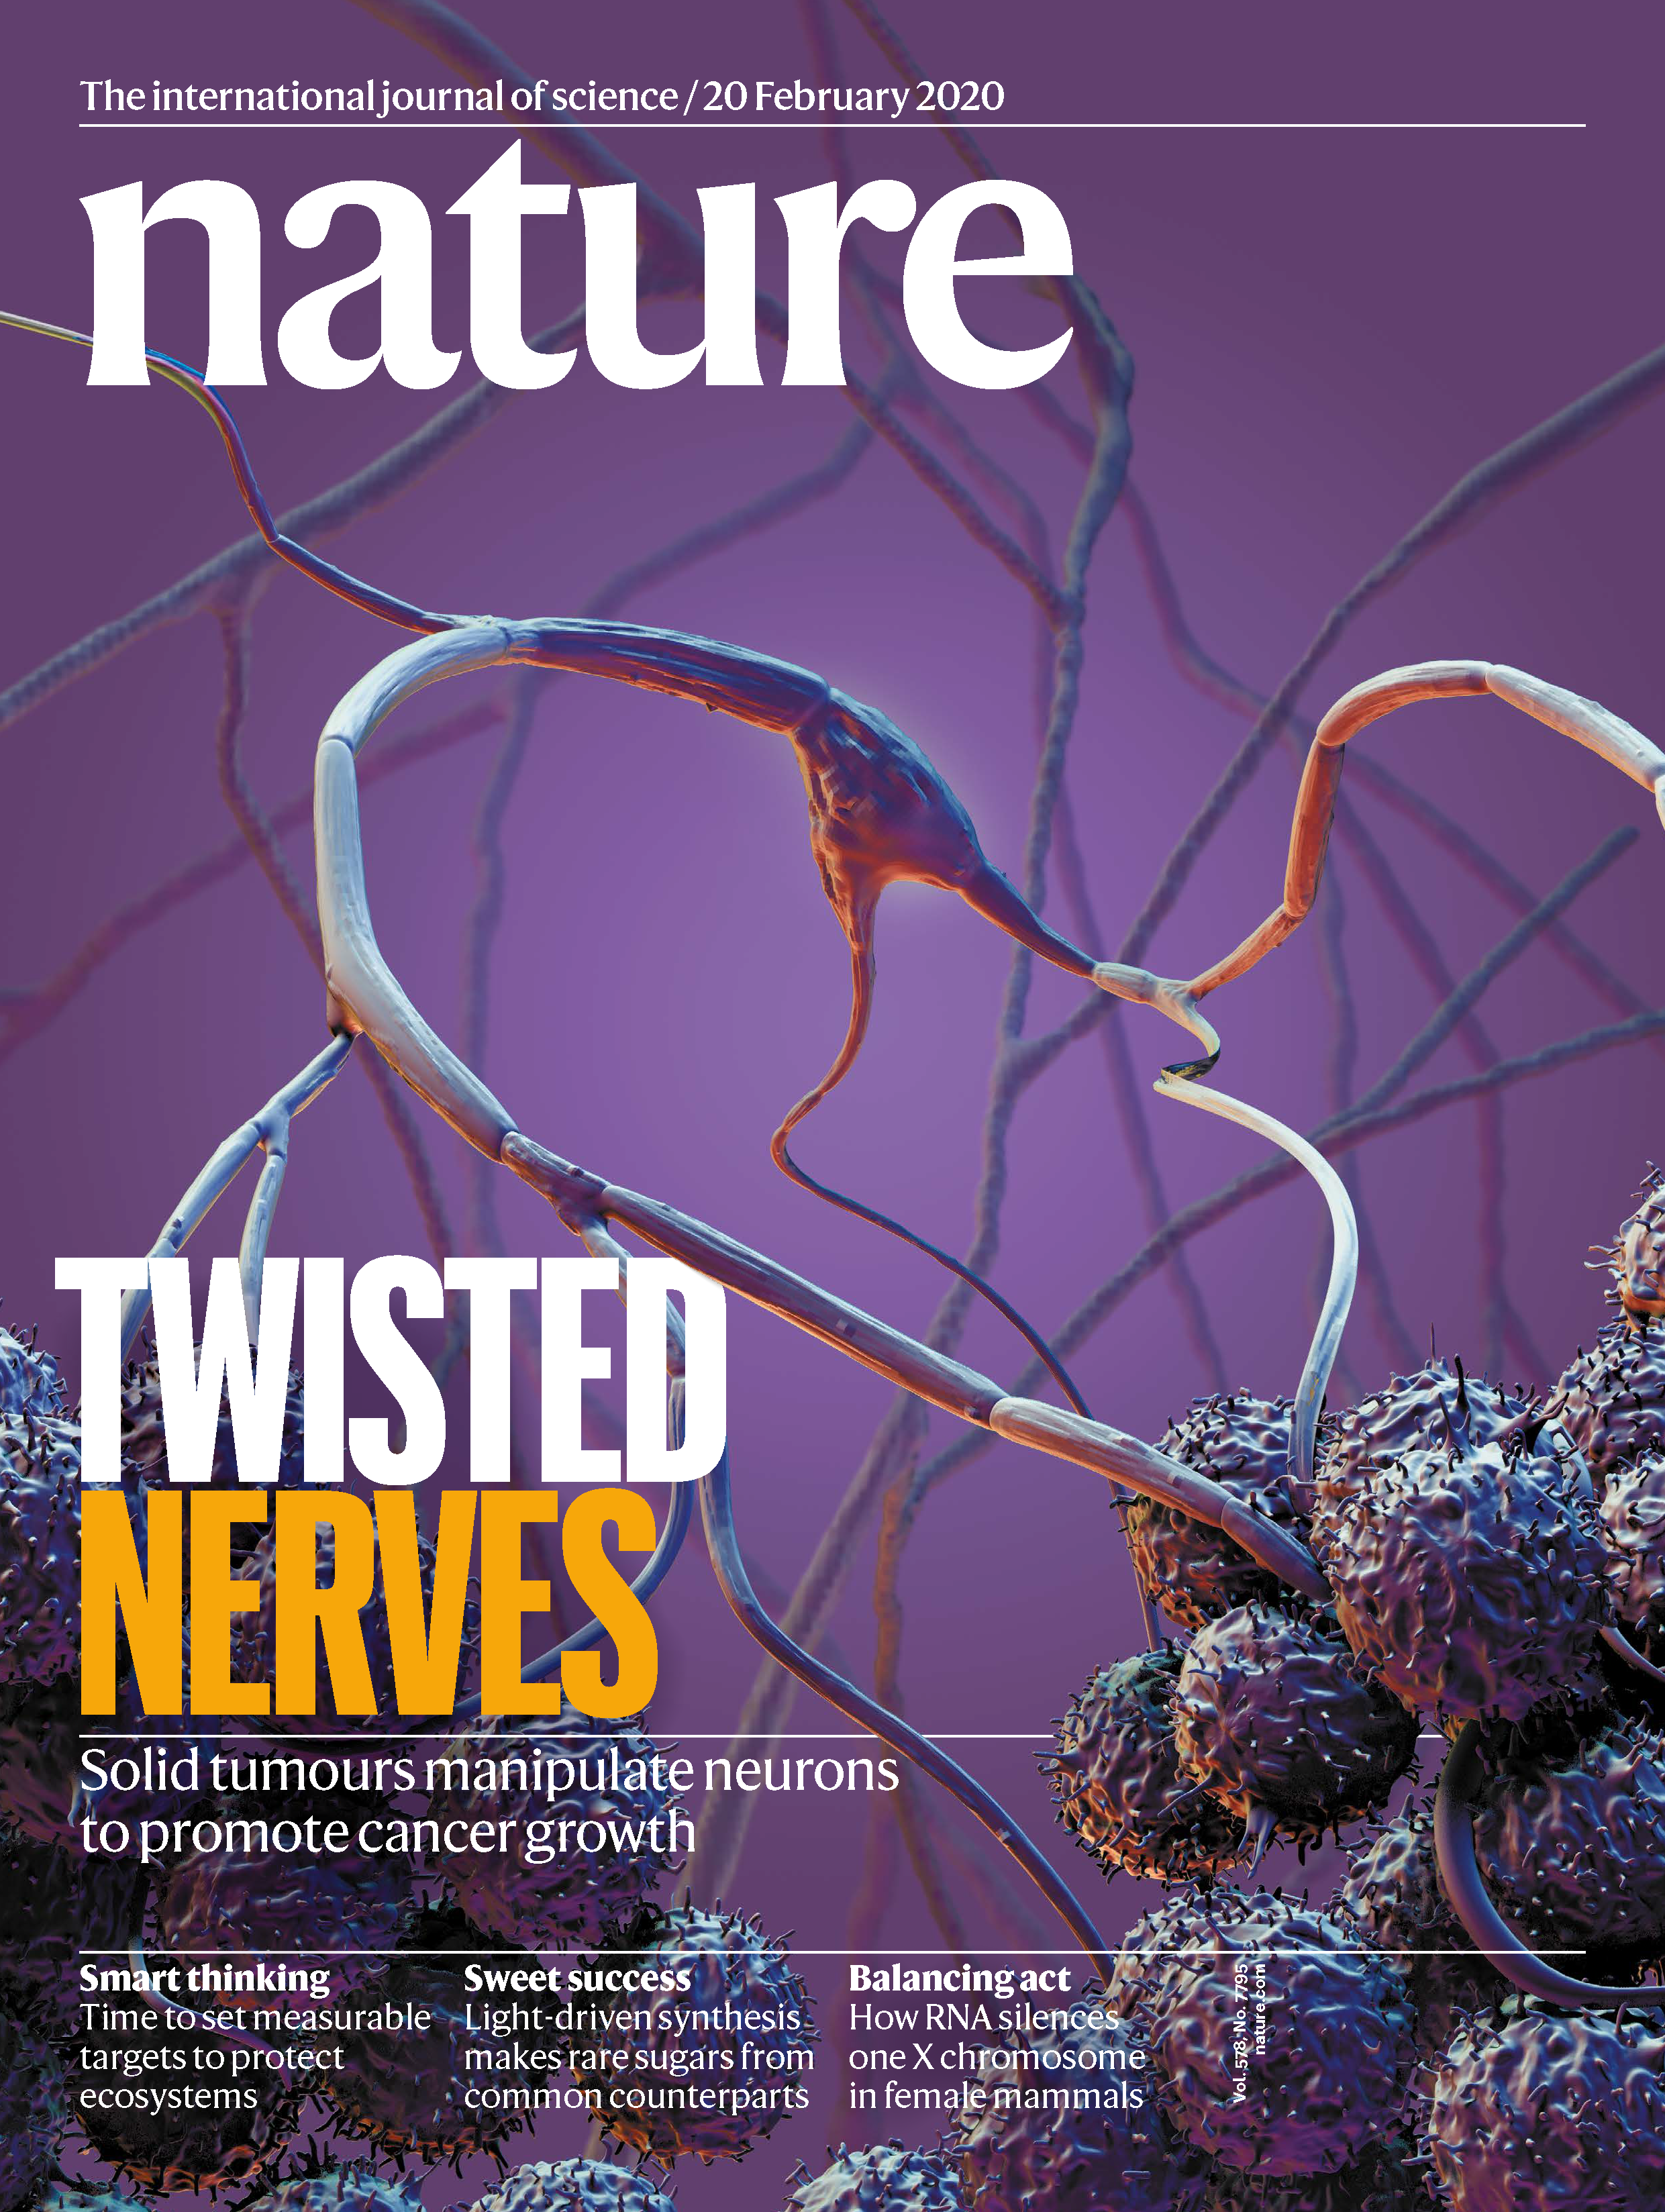 February 2020 cover of Nature Magazine showing nerves and cancerous tumors